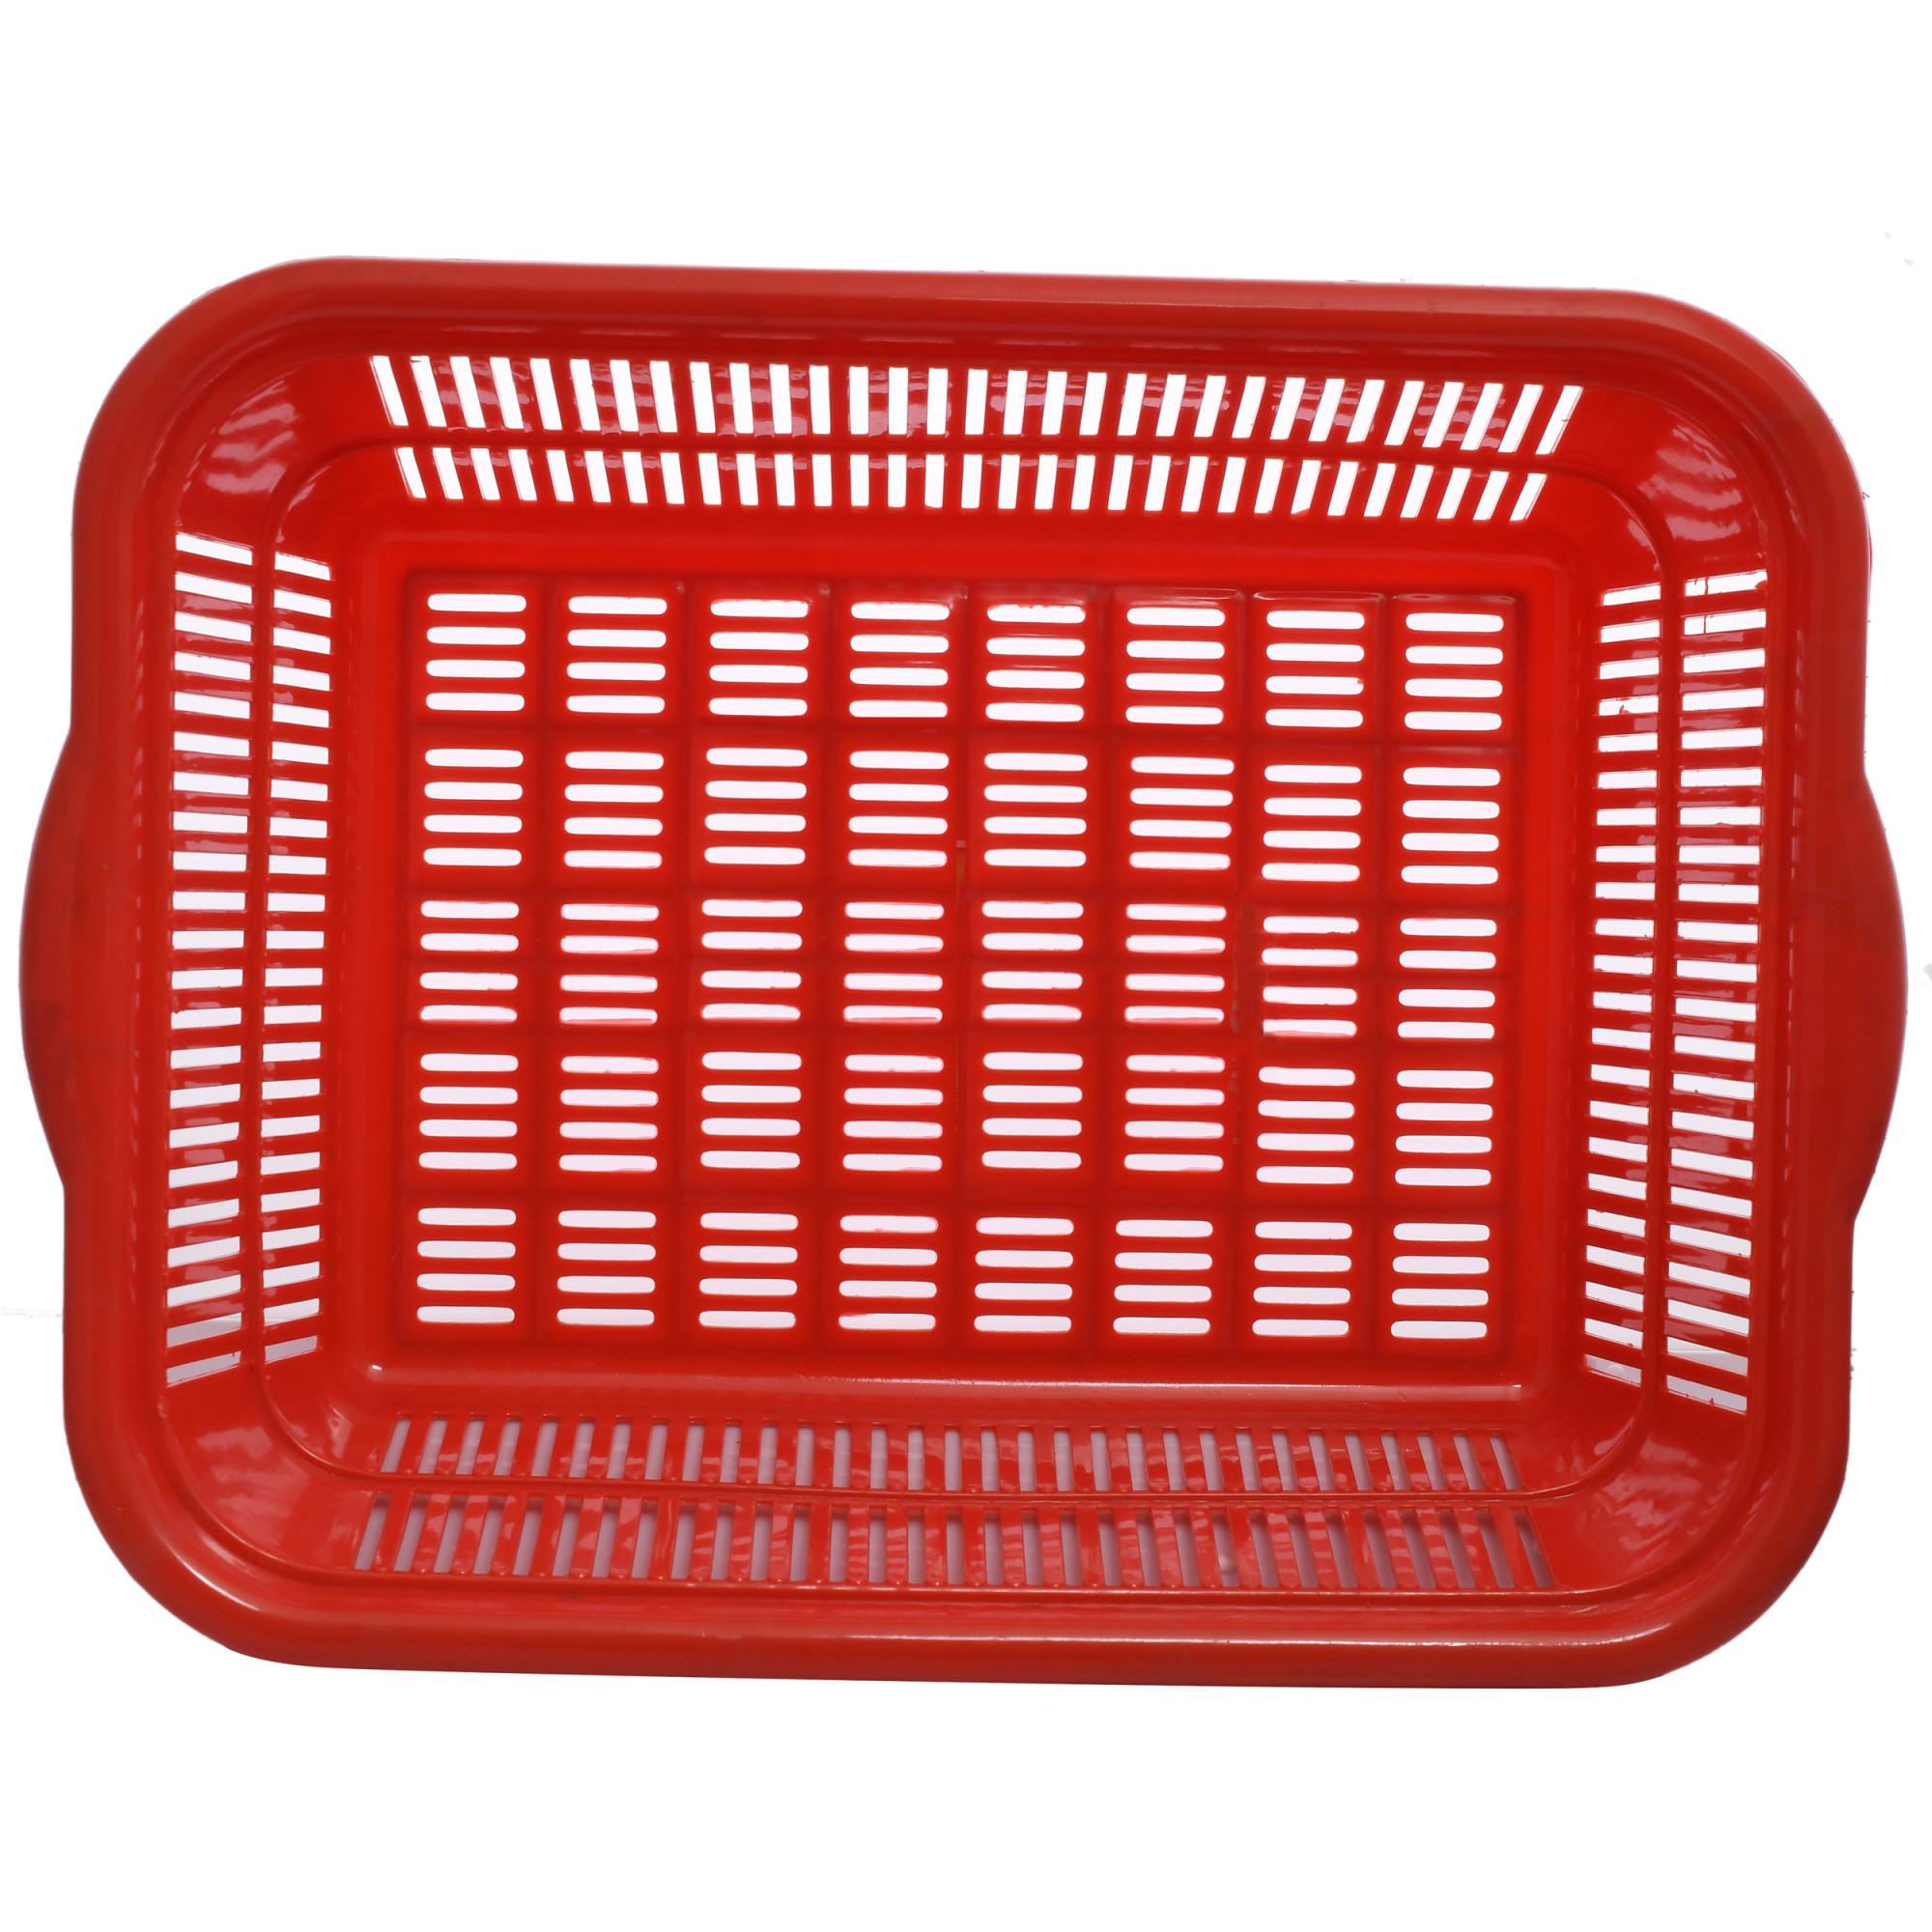 Kuber Industries 3 Pieces Plastic Kitchen Dish Rack Drainer Vegetables And Fruits Basket Dish Rack Multipurpose Organizers ,Medium Size,Red